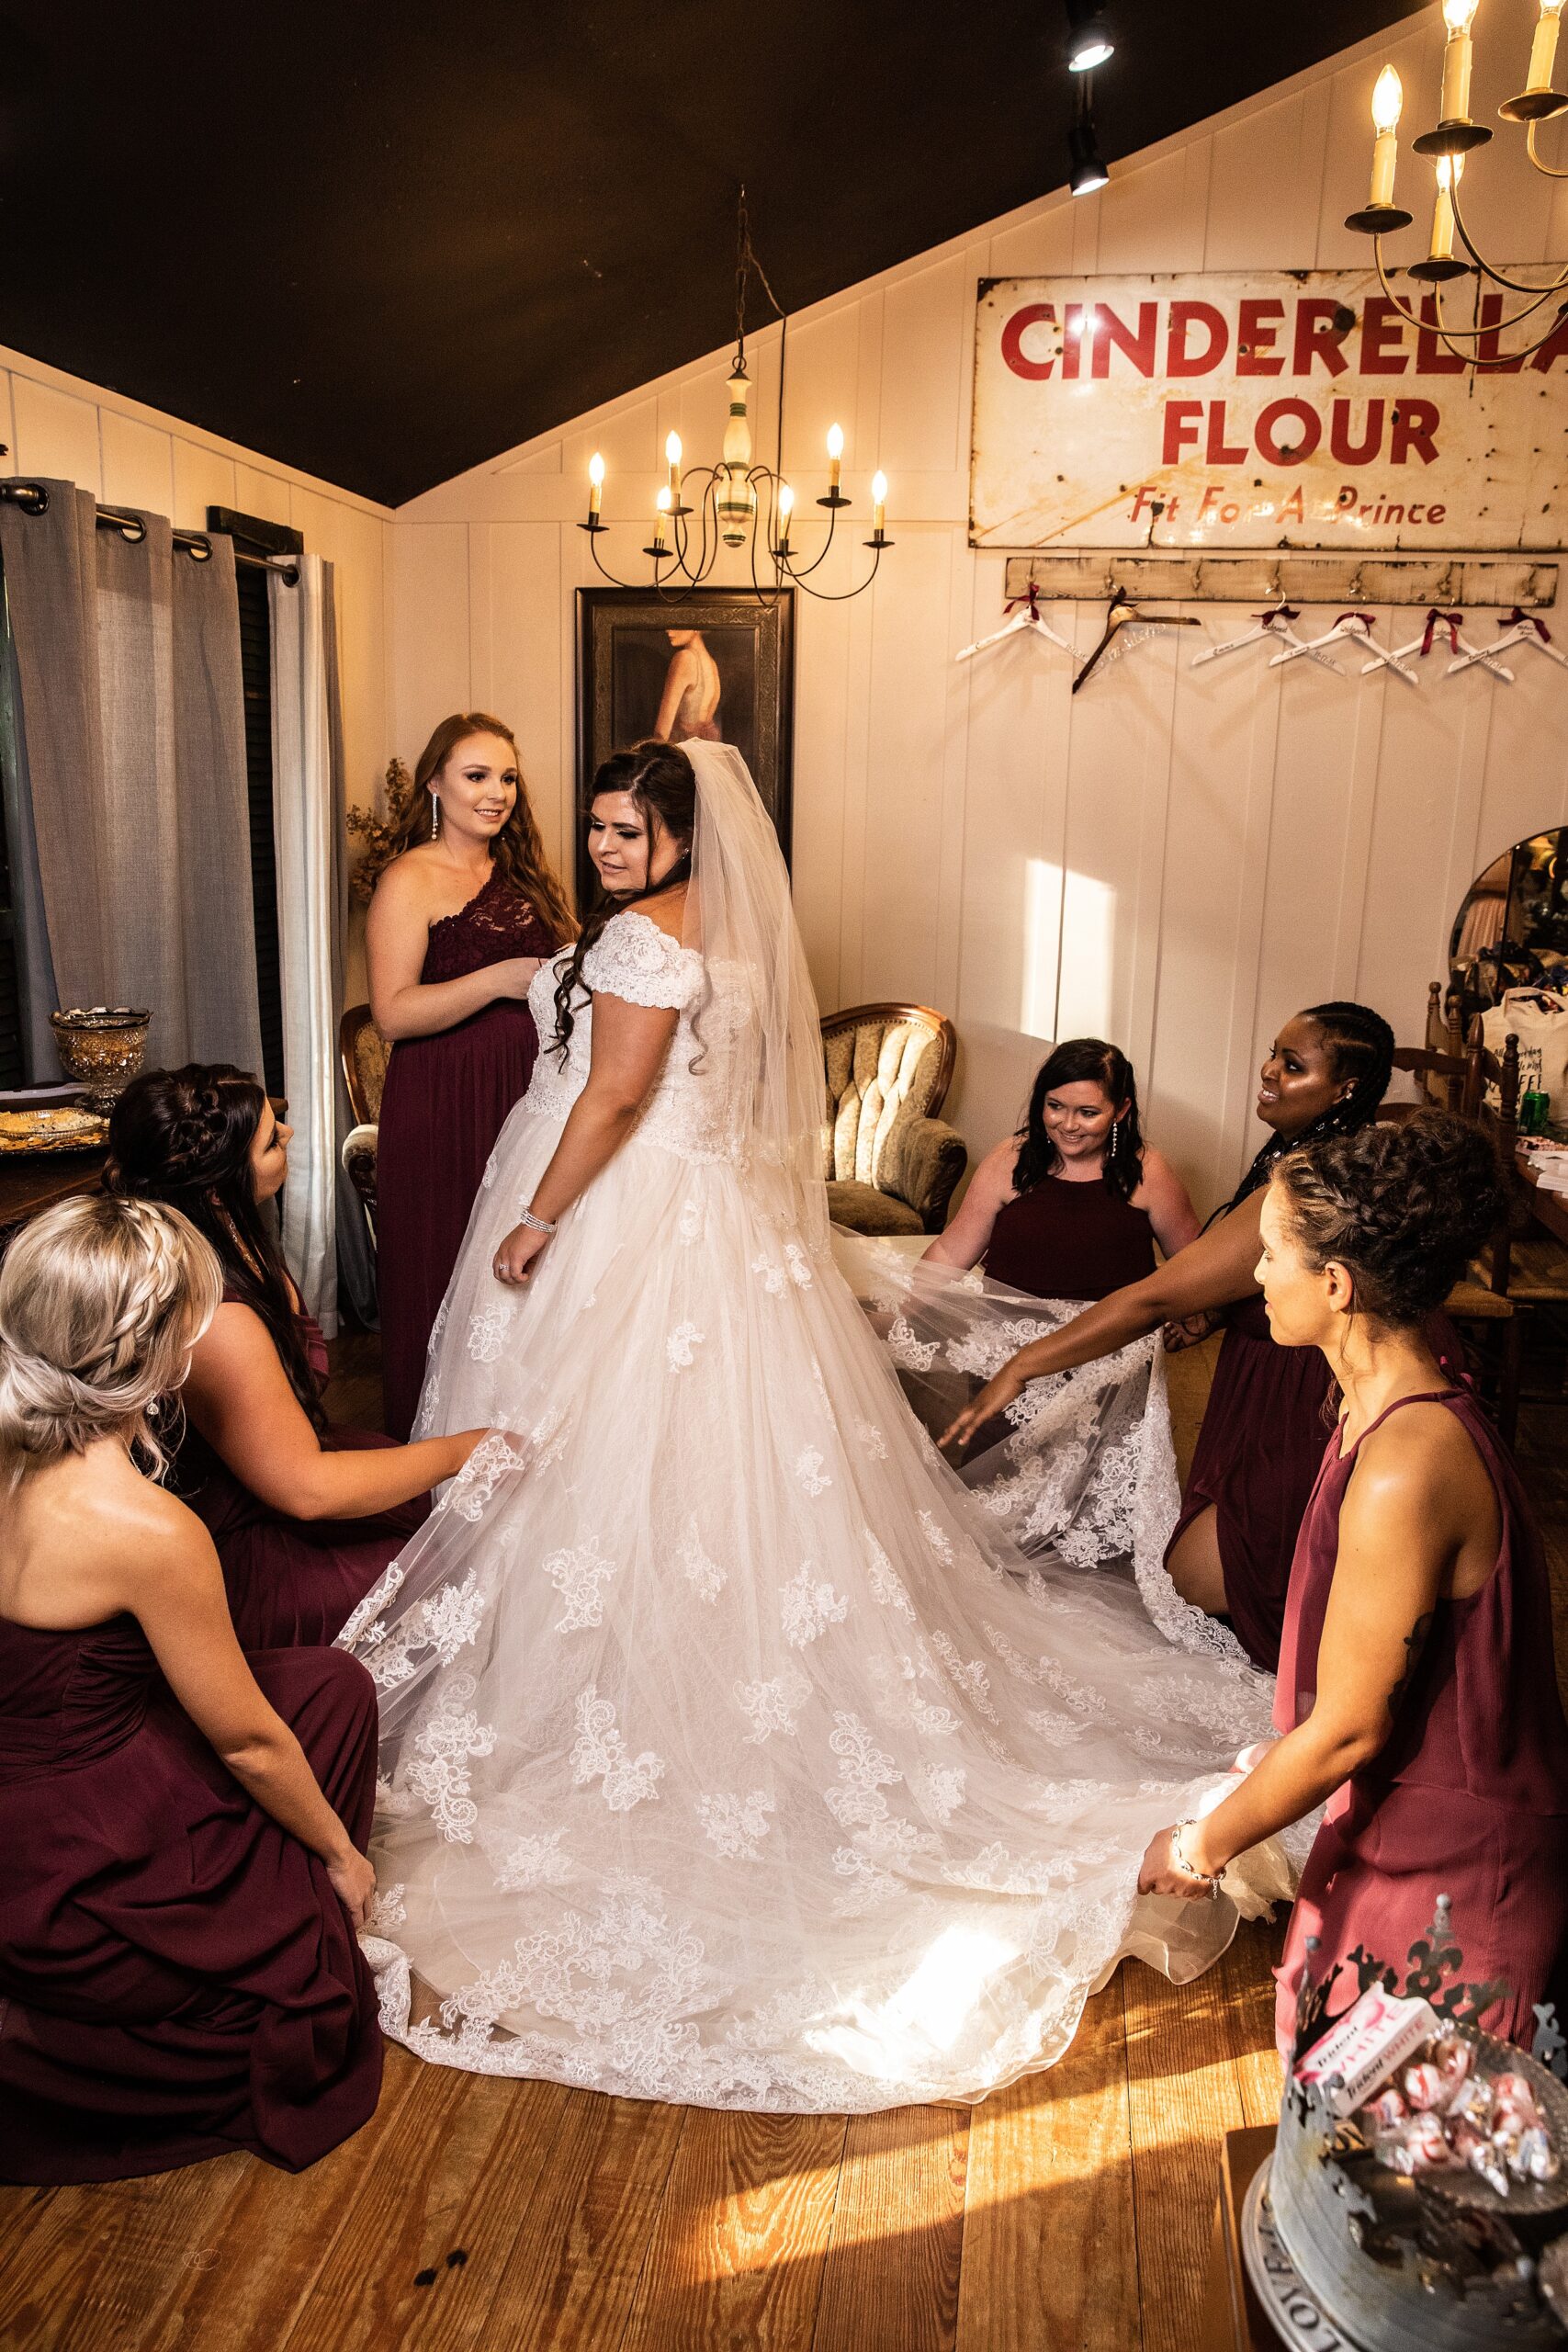 A bride gets ready with her entire bridal party in the getting ready room